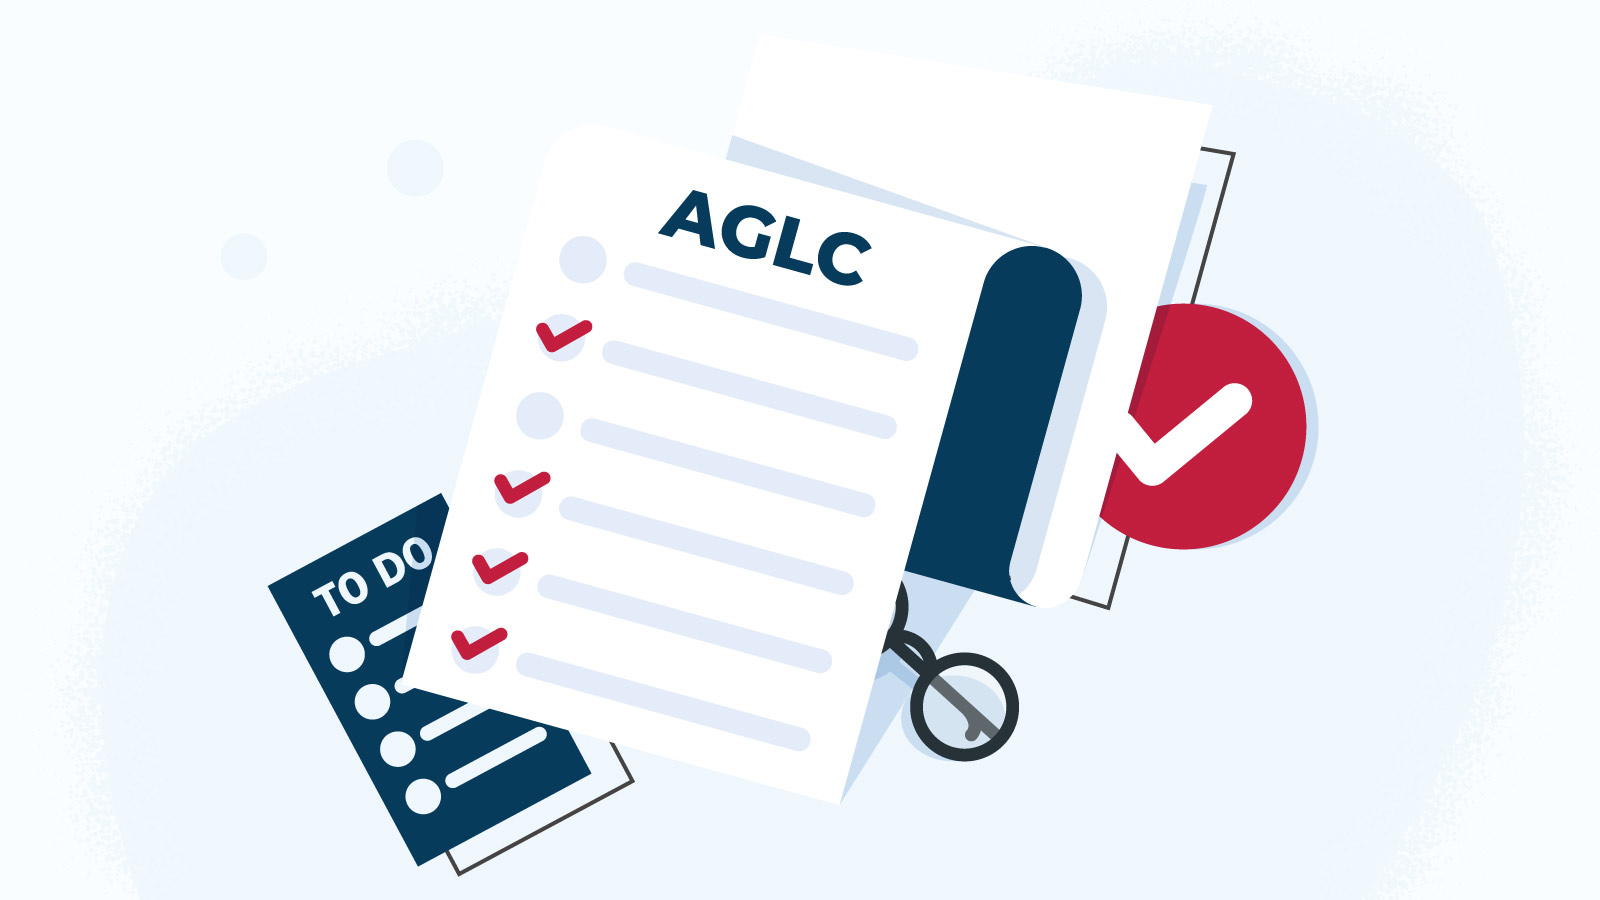 Casino requirements for AGLC licensing